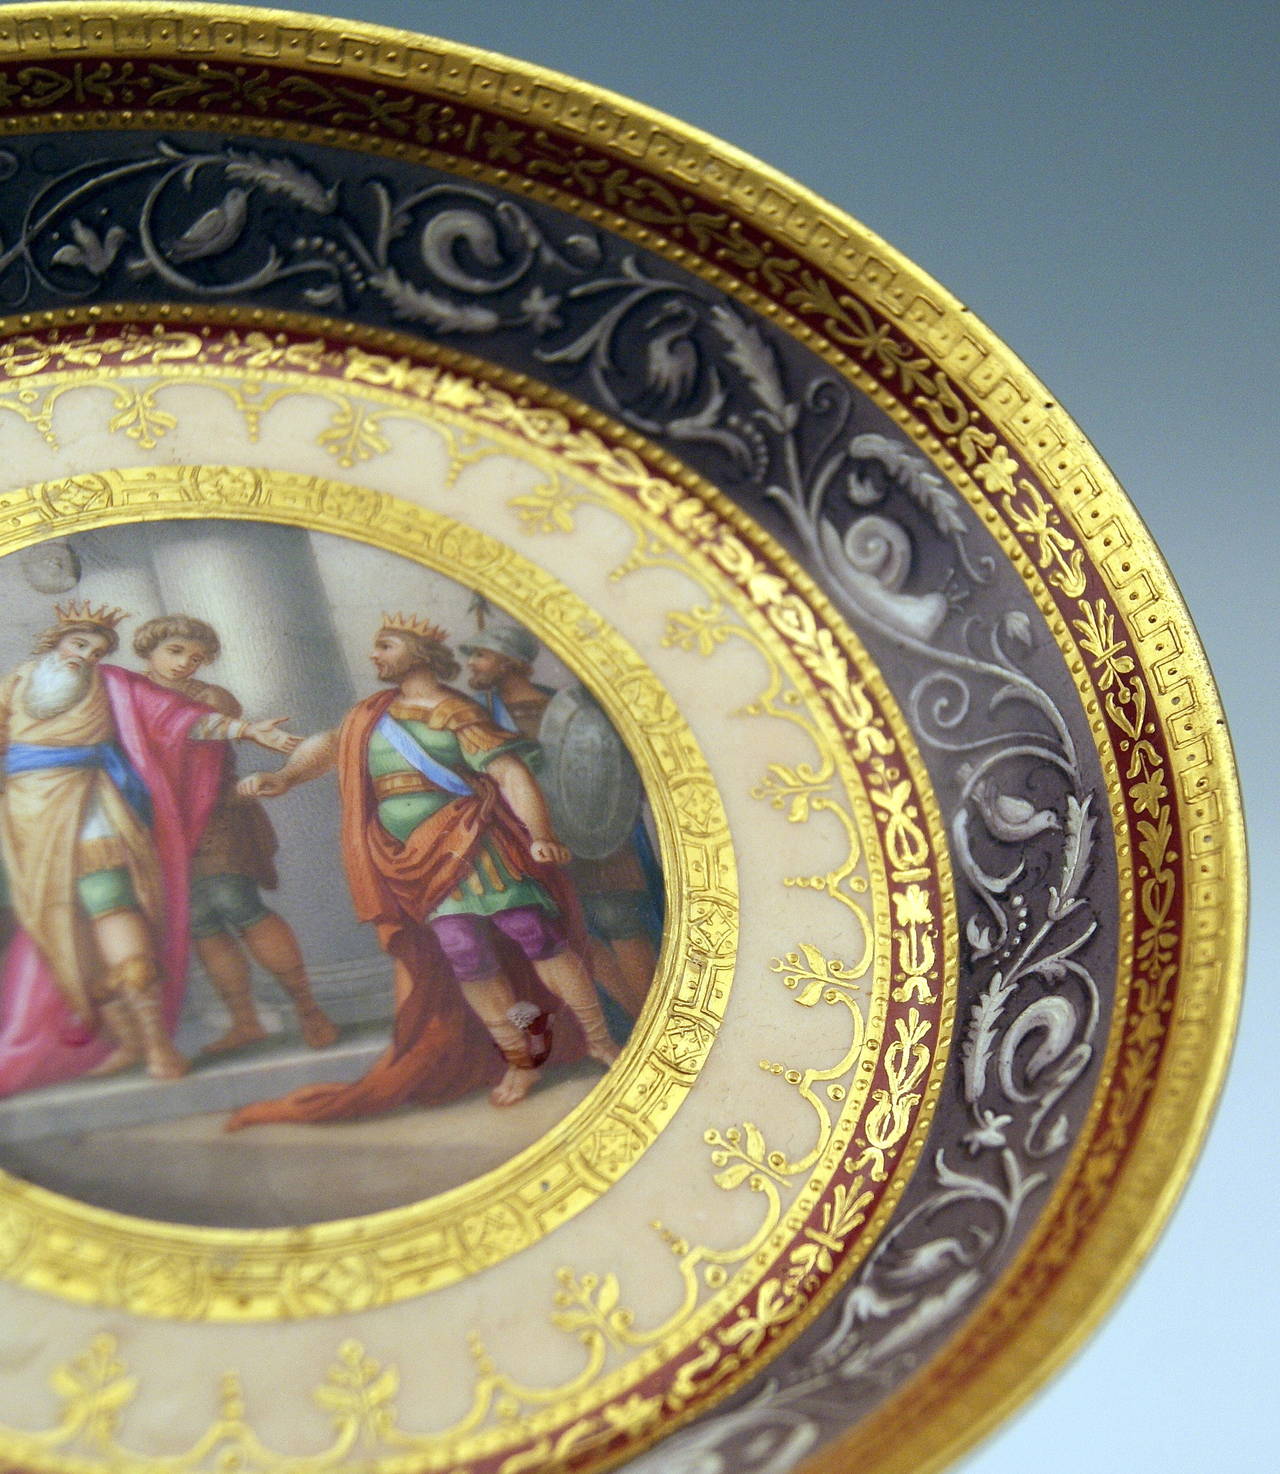 Painted Imperial Porcelain Antique Mythology Cup and Saucer, Vienna, 1806-1815